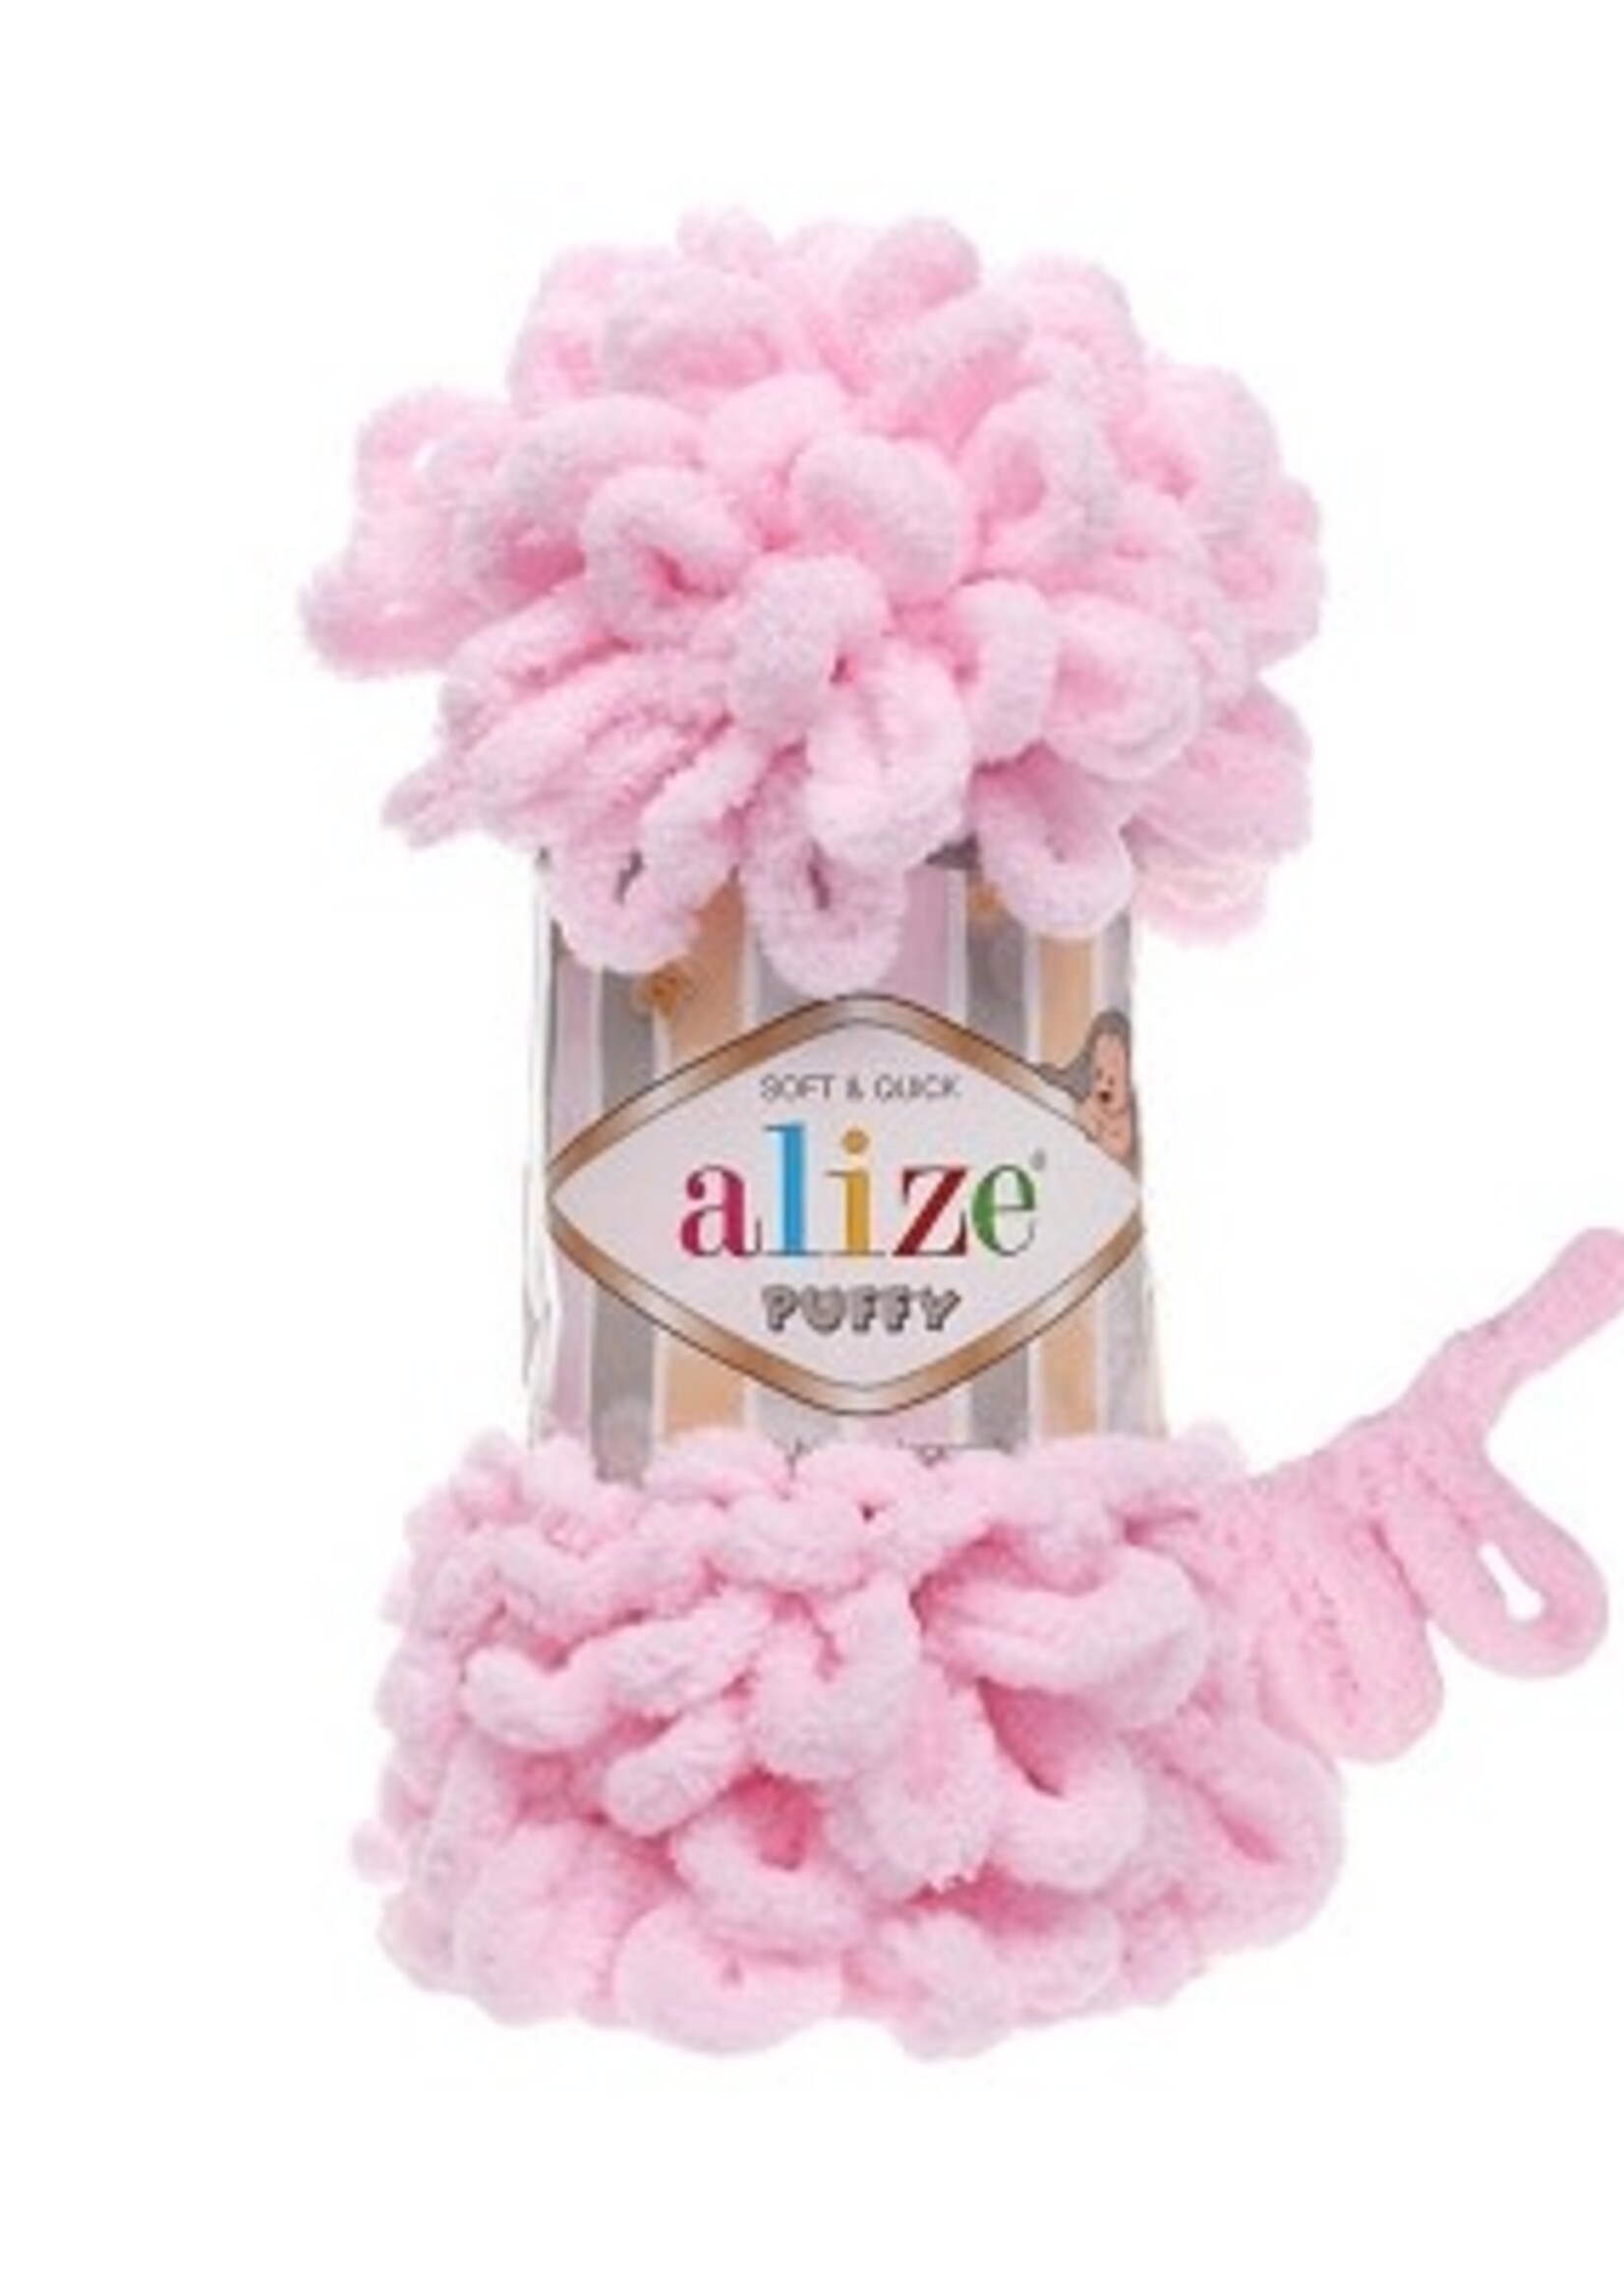 Puffy - Alize - 031 baby pink